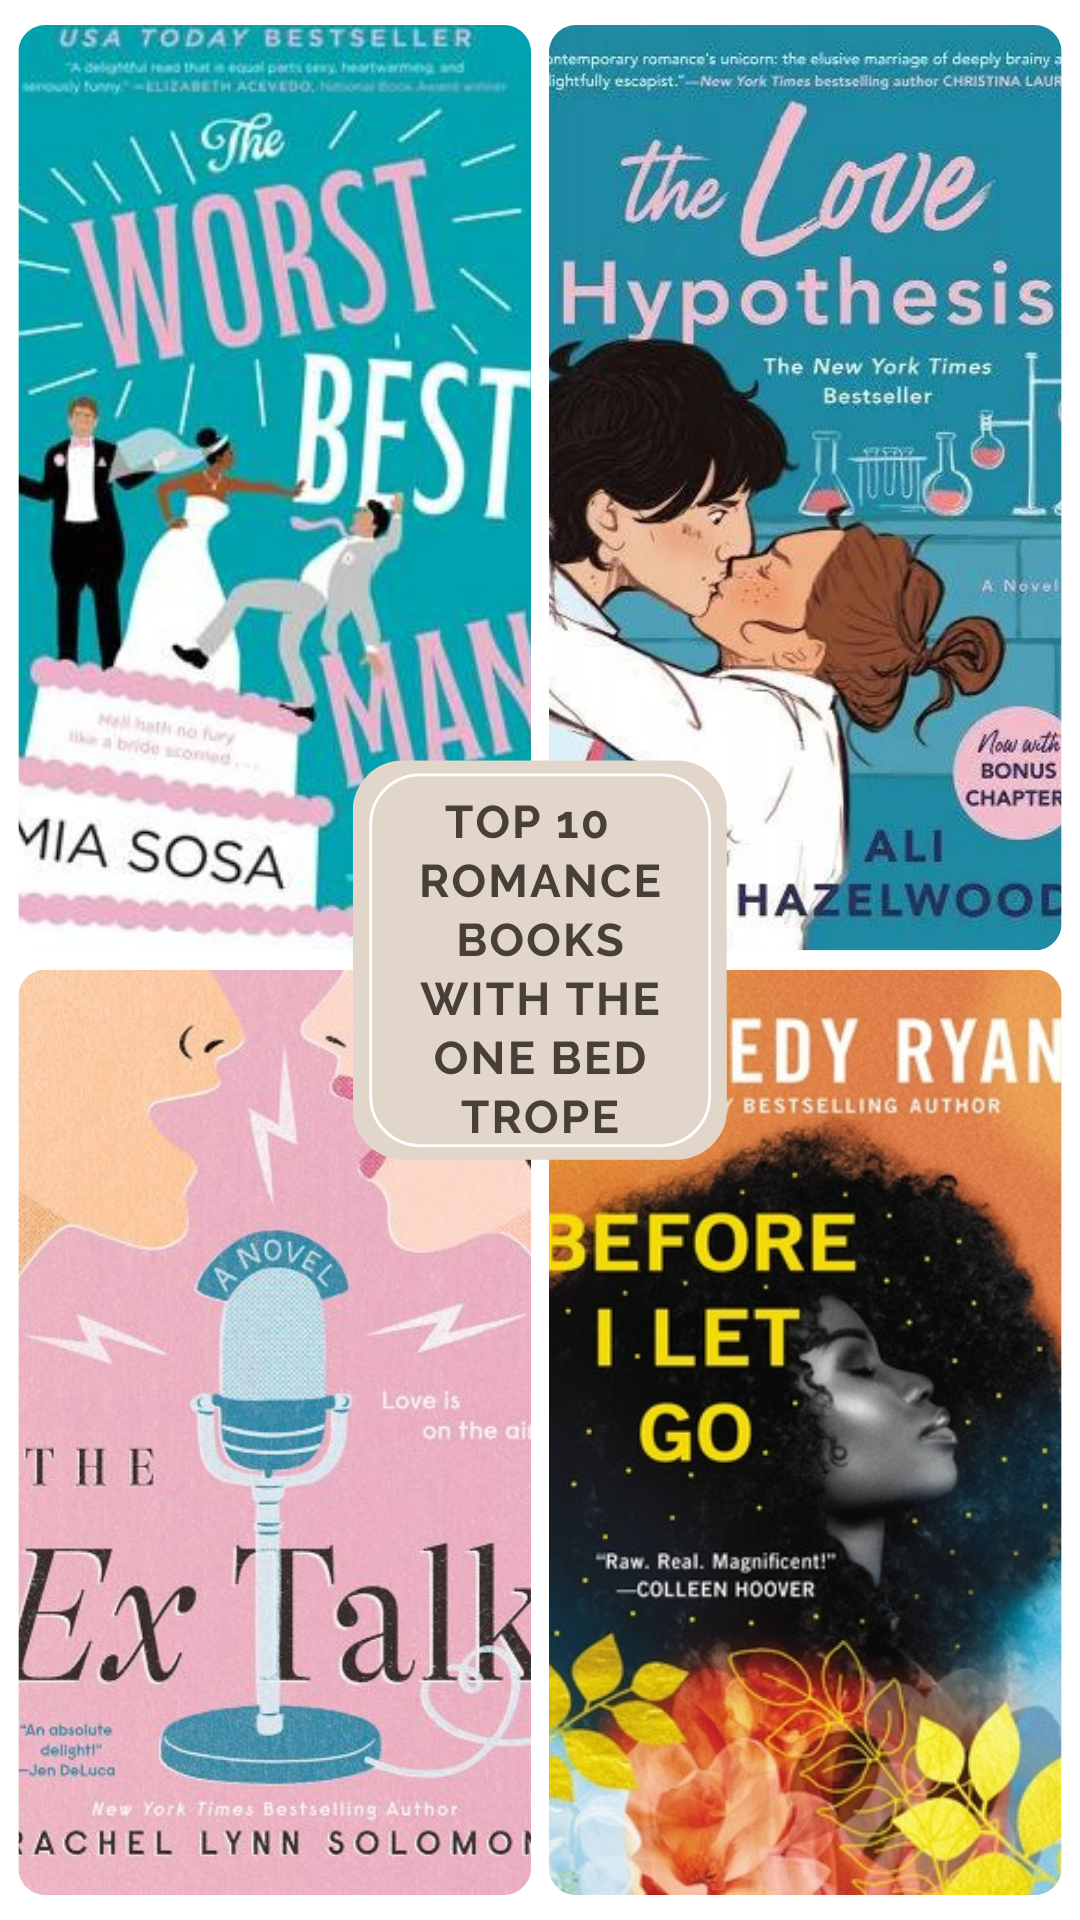 10 Must-Read Romance Books featuring the One Bed Trope